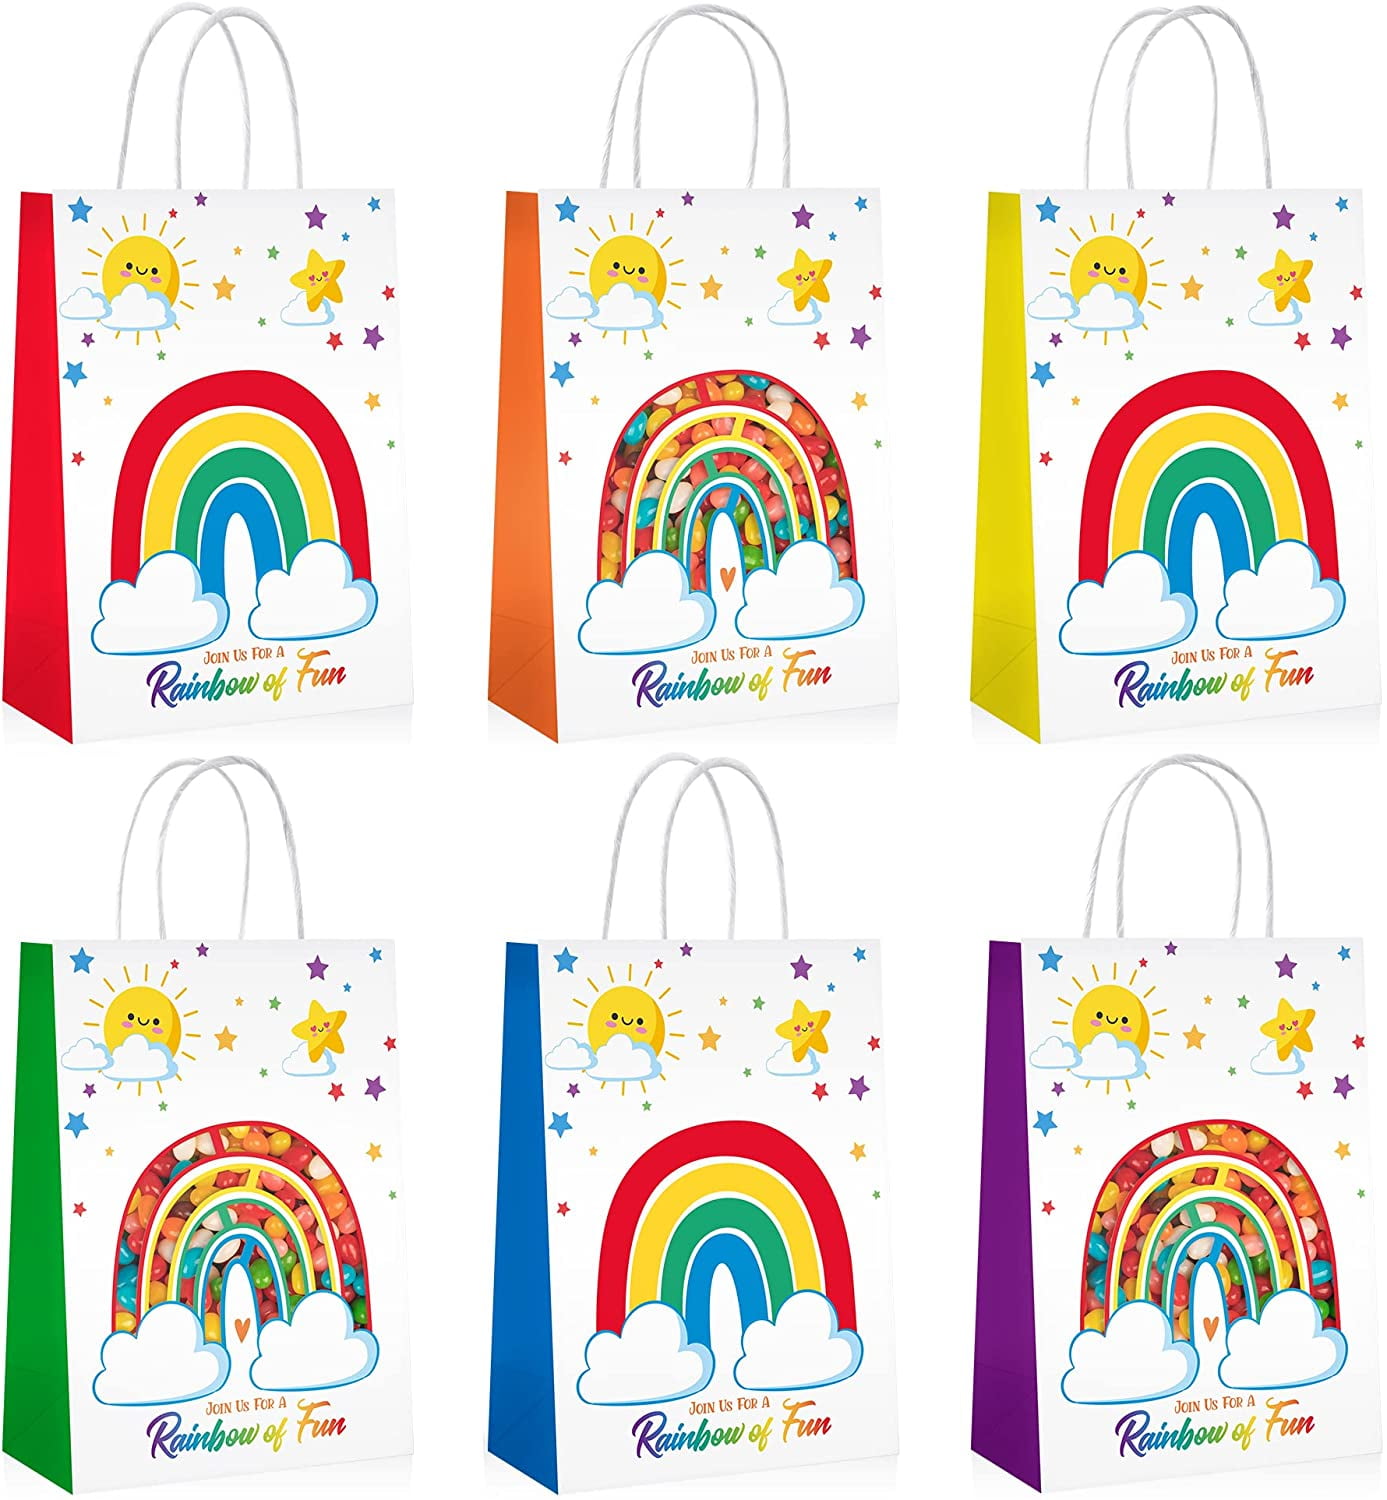 LovesTown Colorful Gift Bags, 18 Pcs Colored Paper Bags Rainbow Party Favor Bags Kraft Candy Bags with Handle for Birthday Wedding and Party